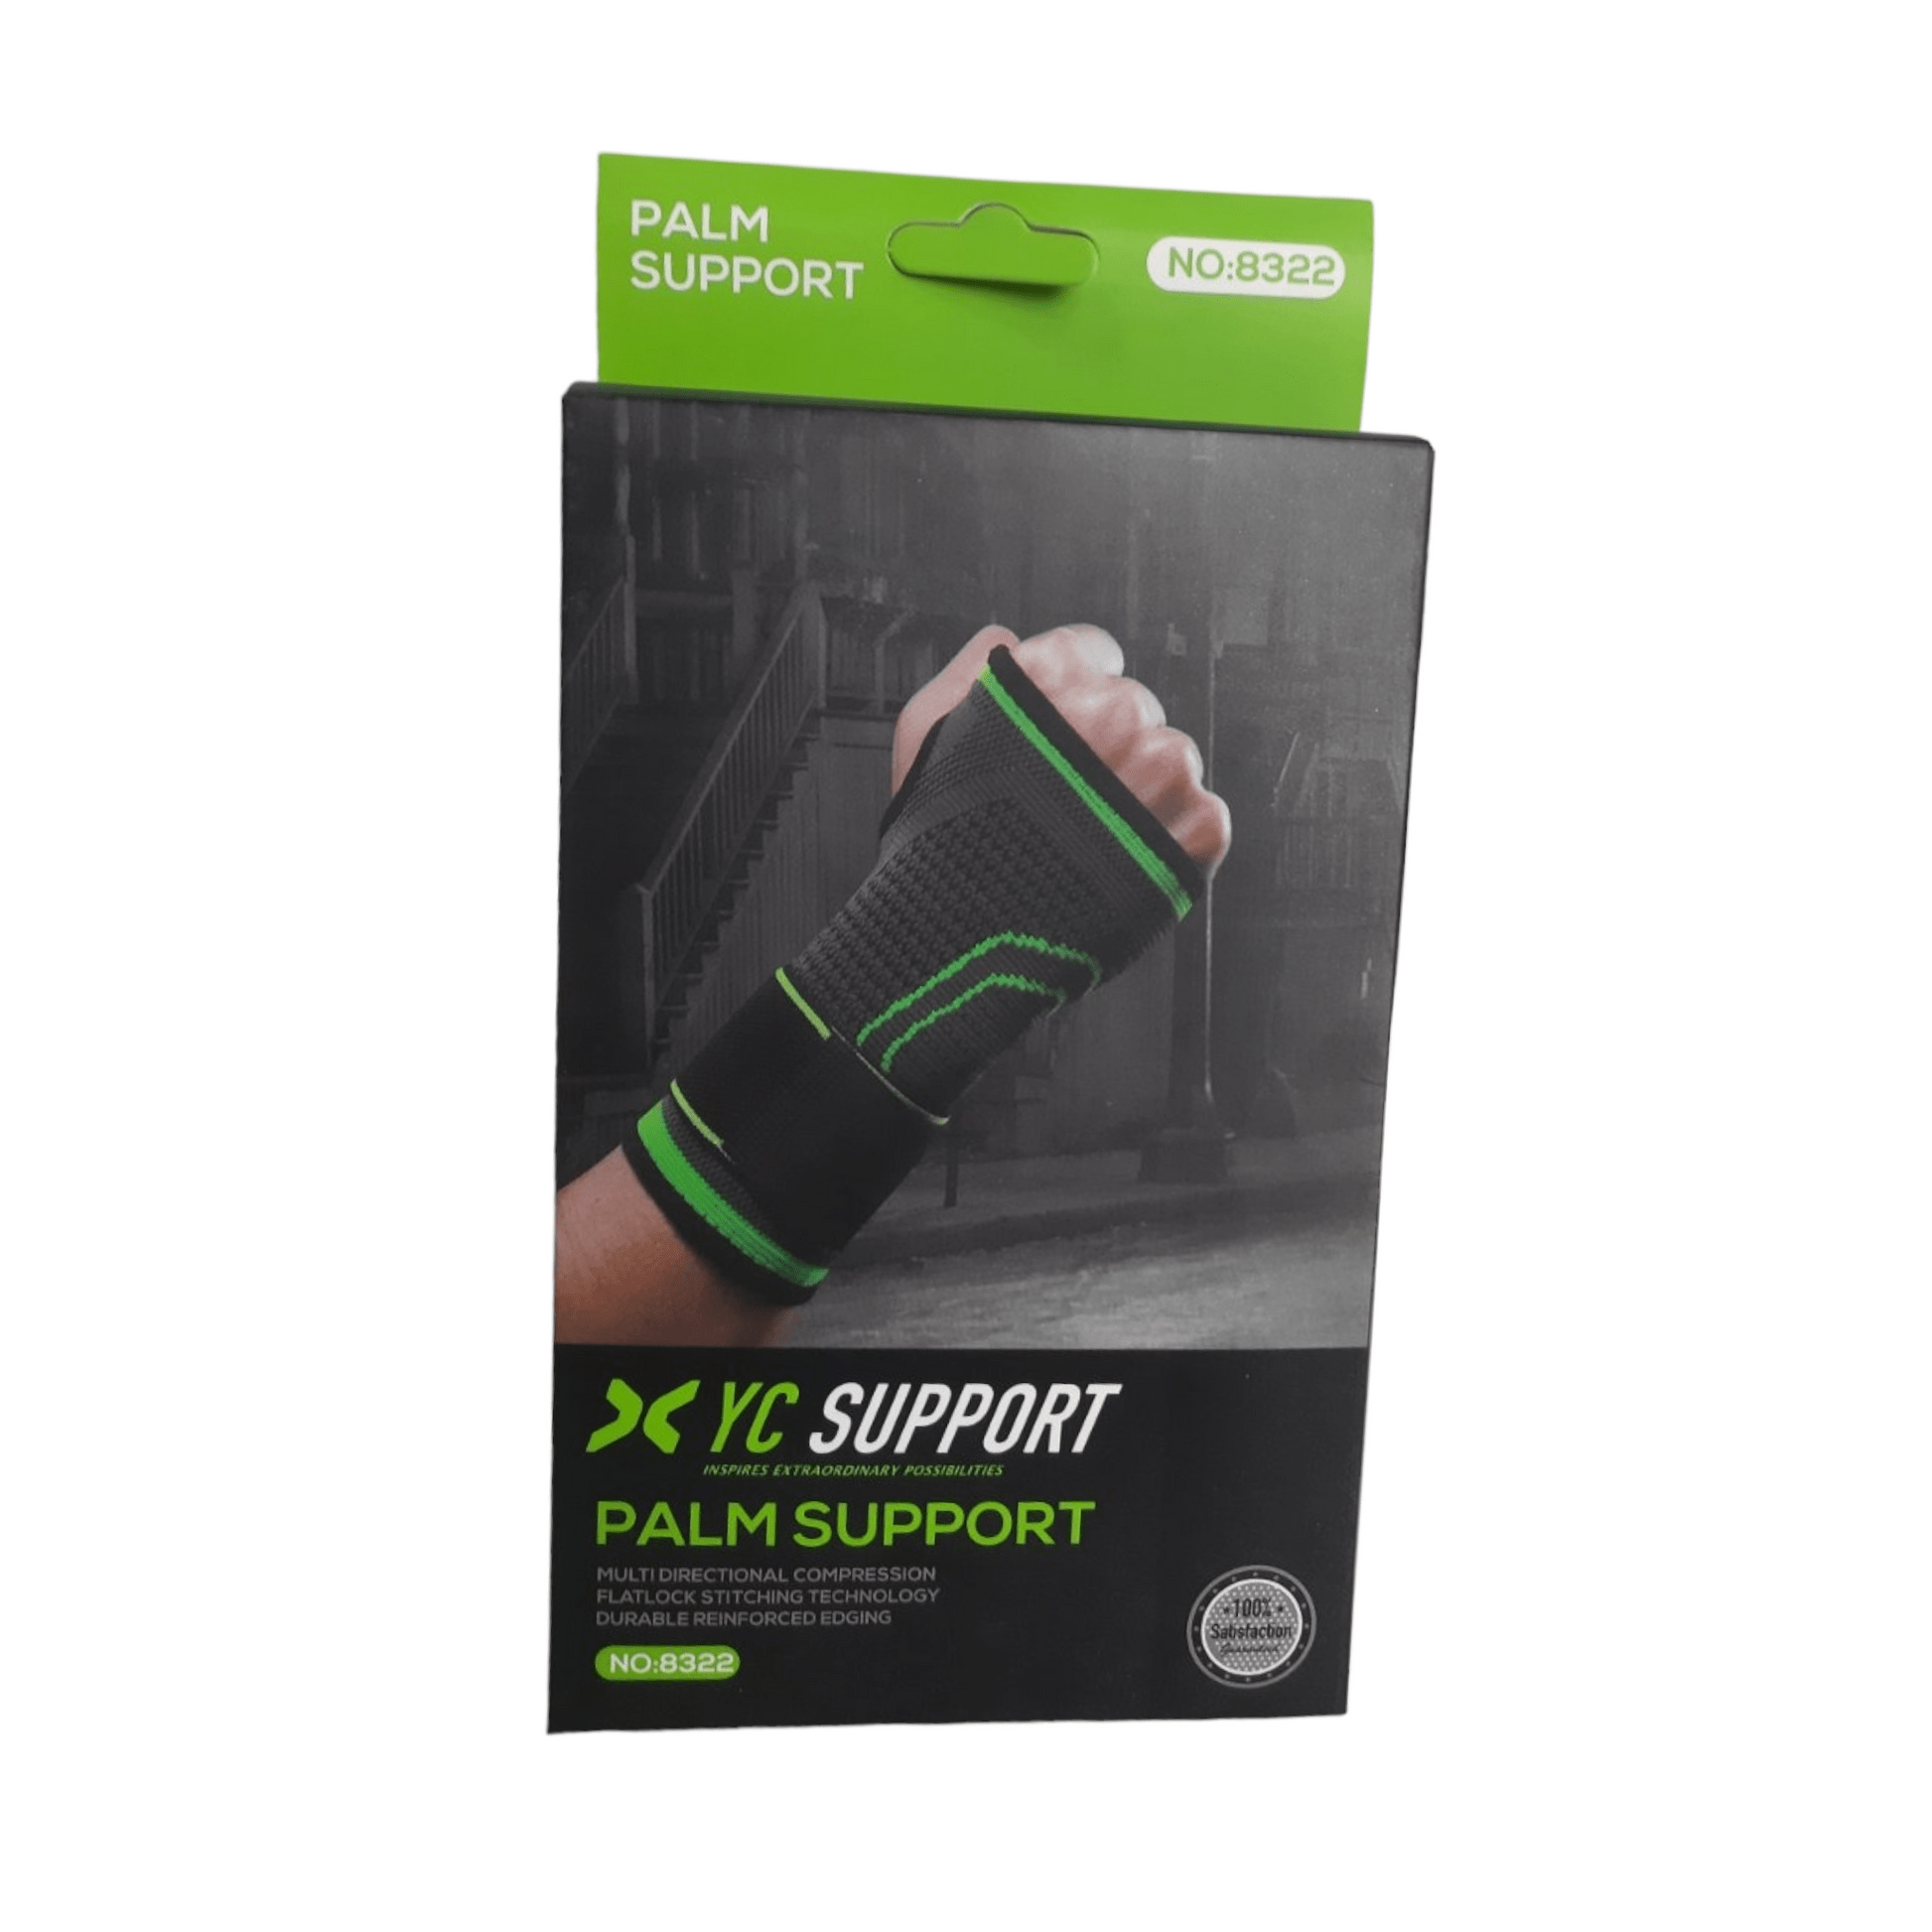 Palm Support YC 8322 - Valetica Sports